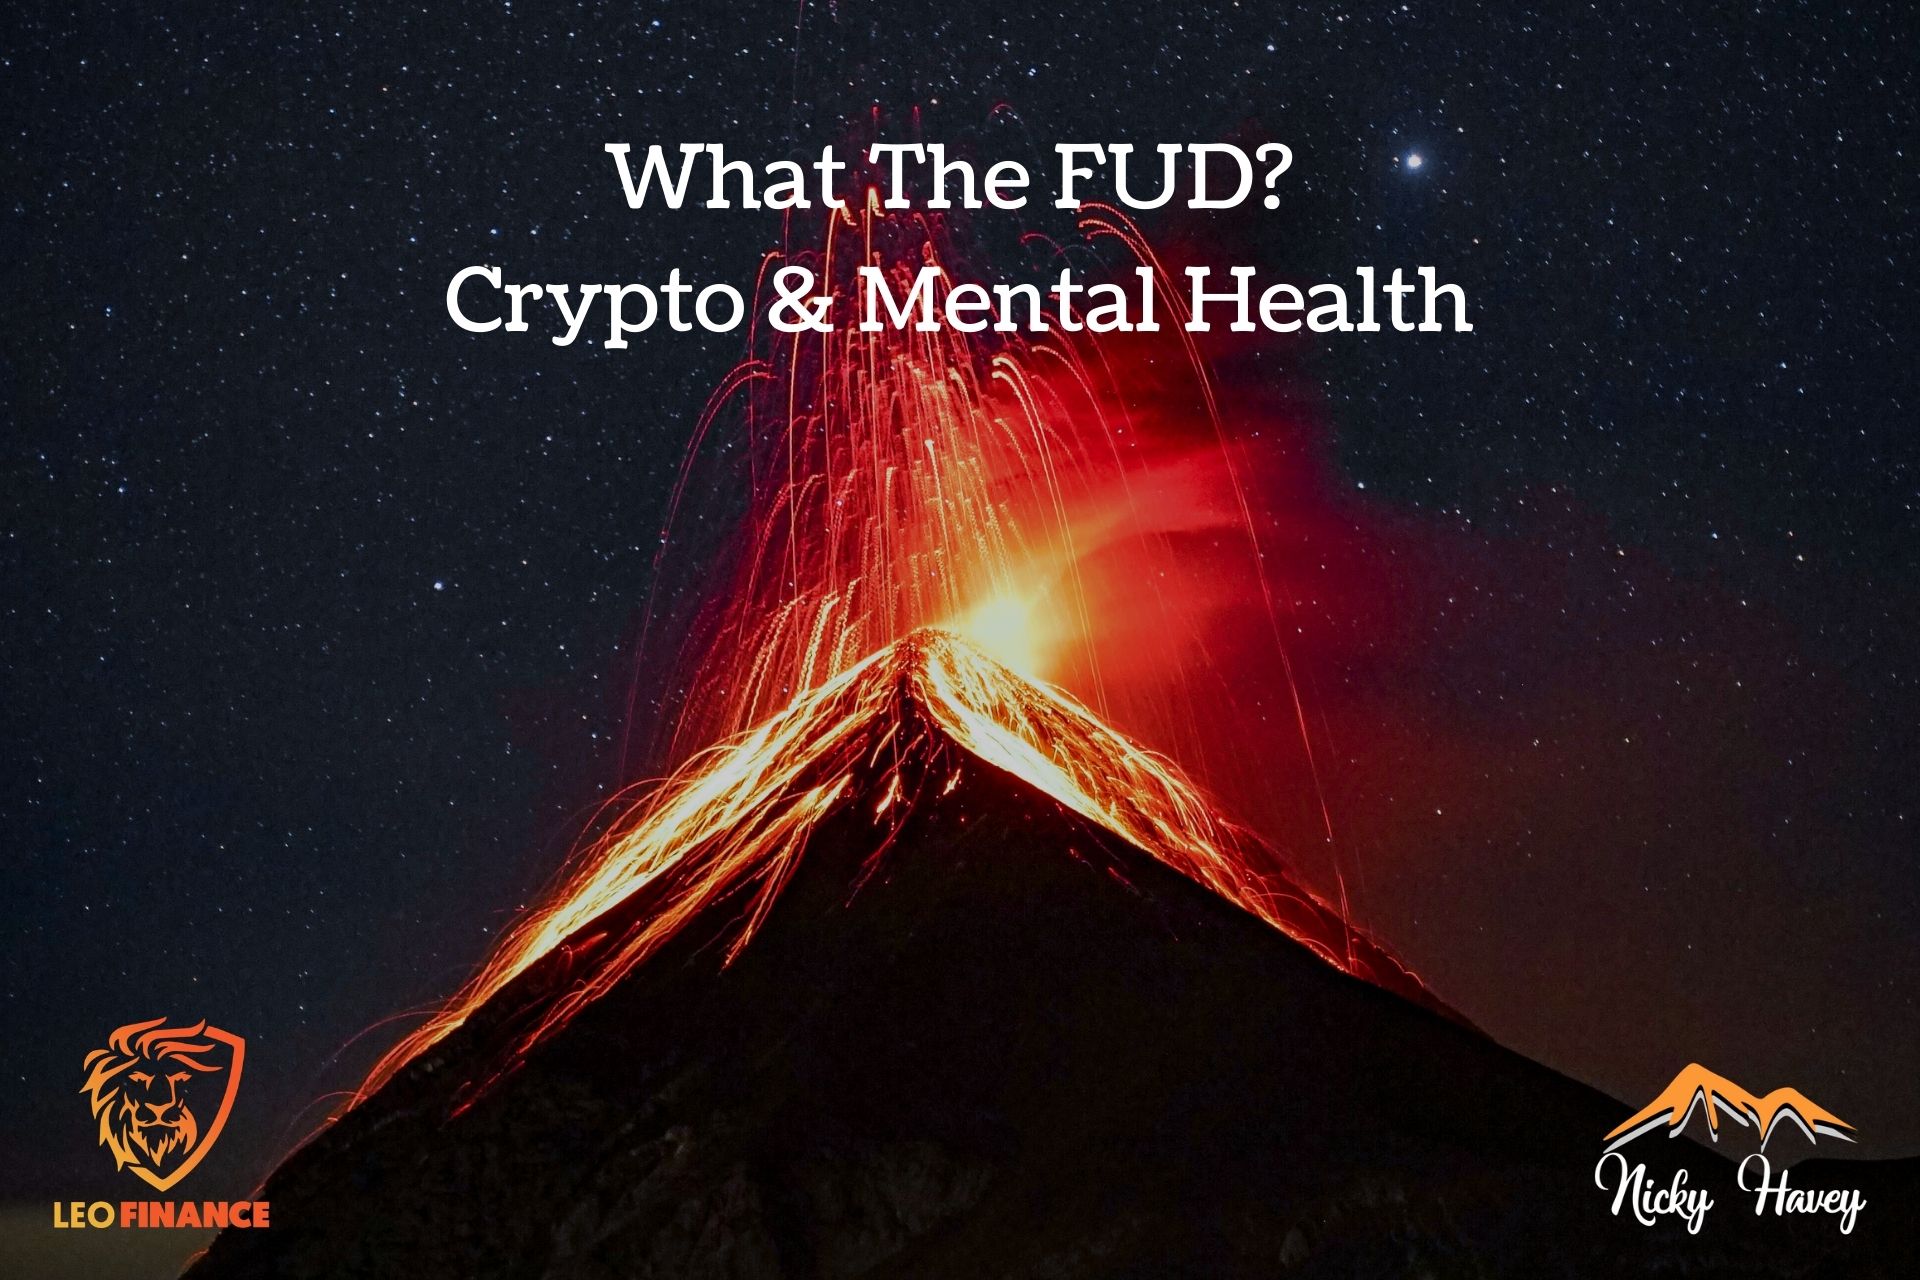 What The FUD? Crypto & Mental Health